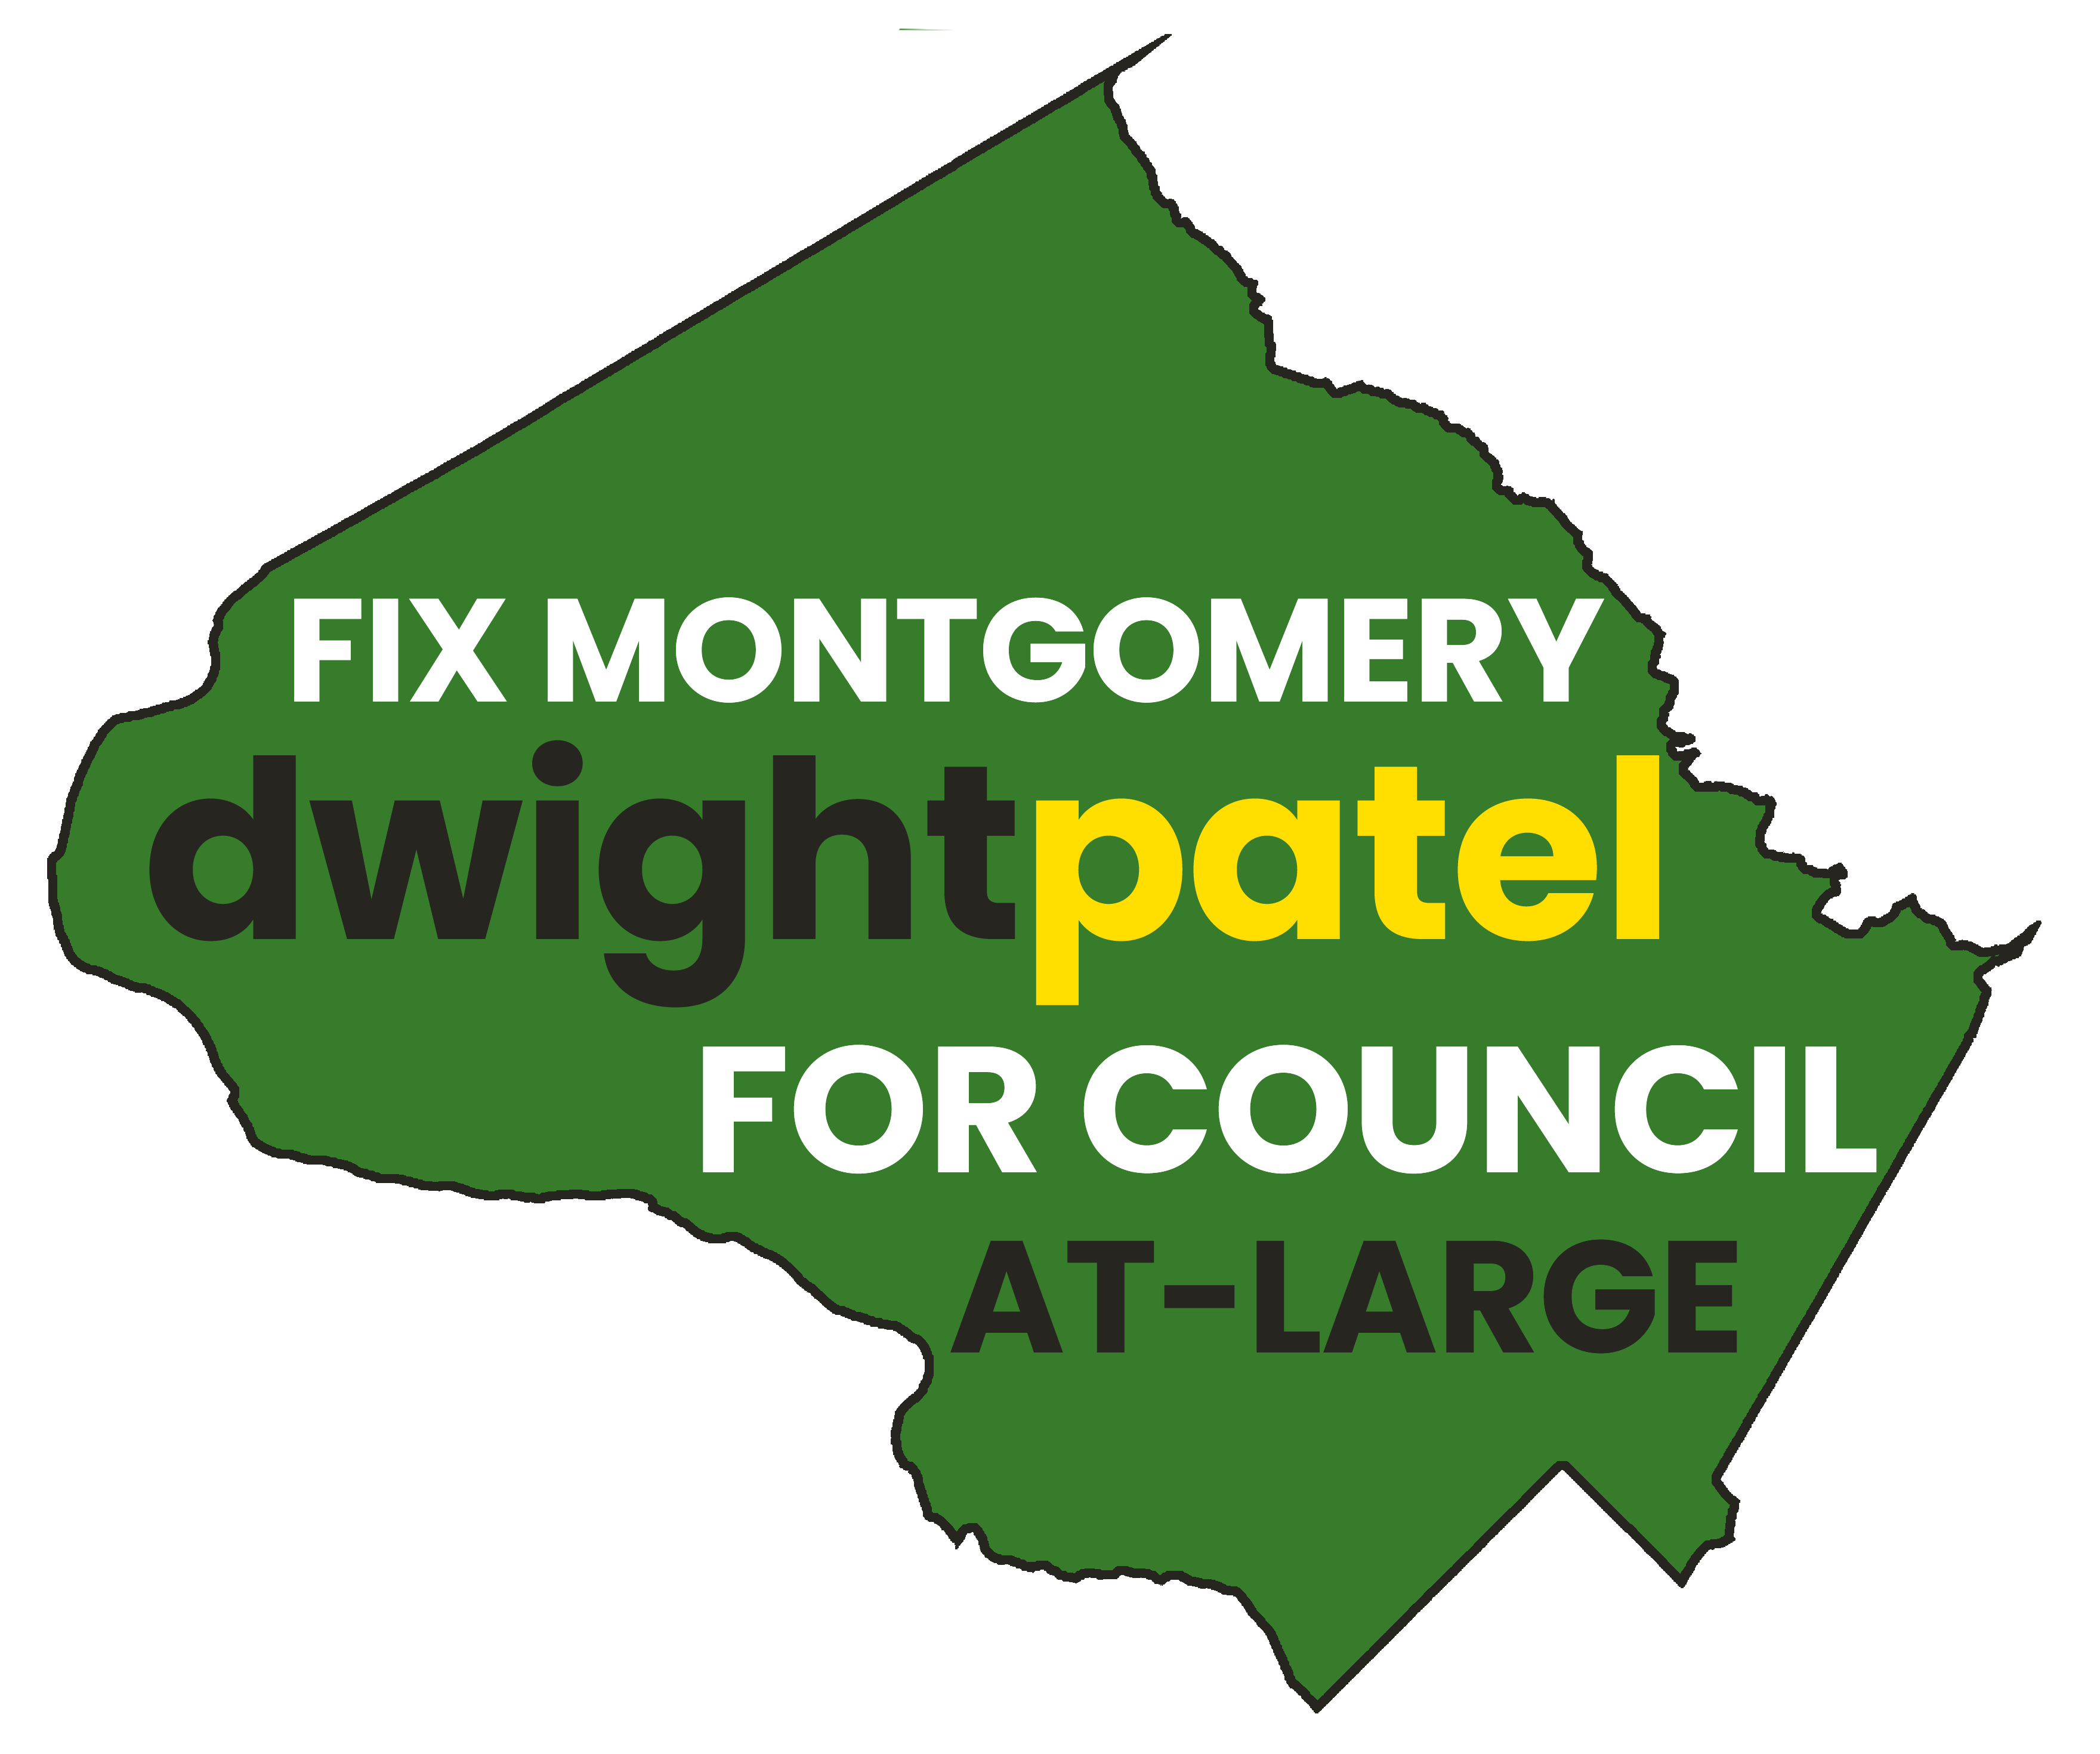 Dwight Patel for County Council -At-Large